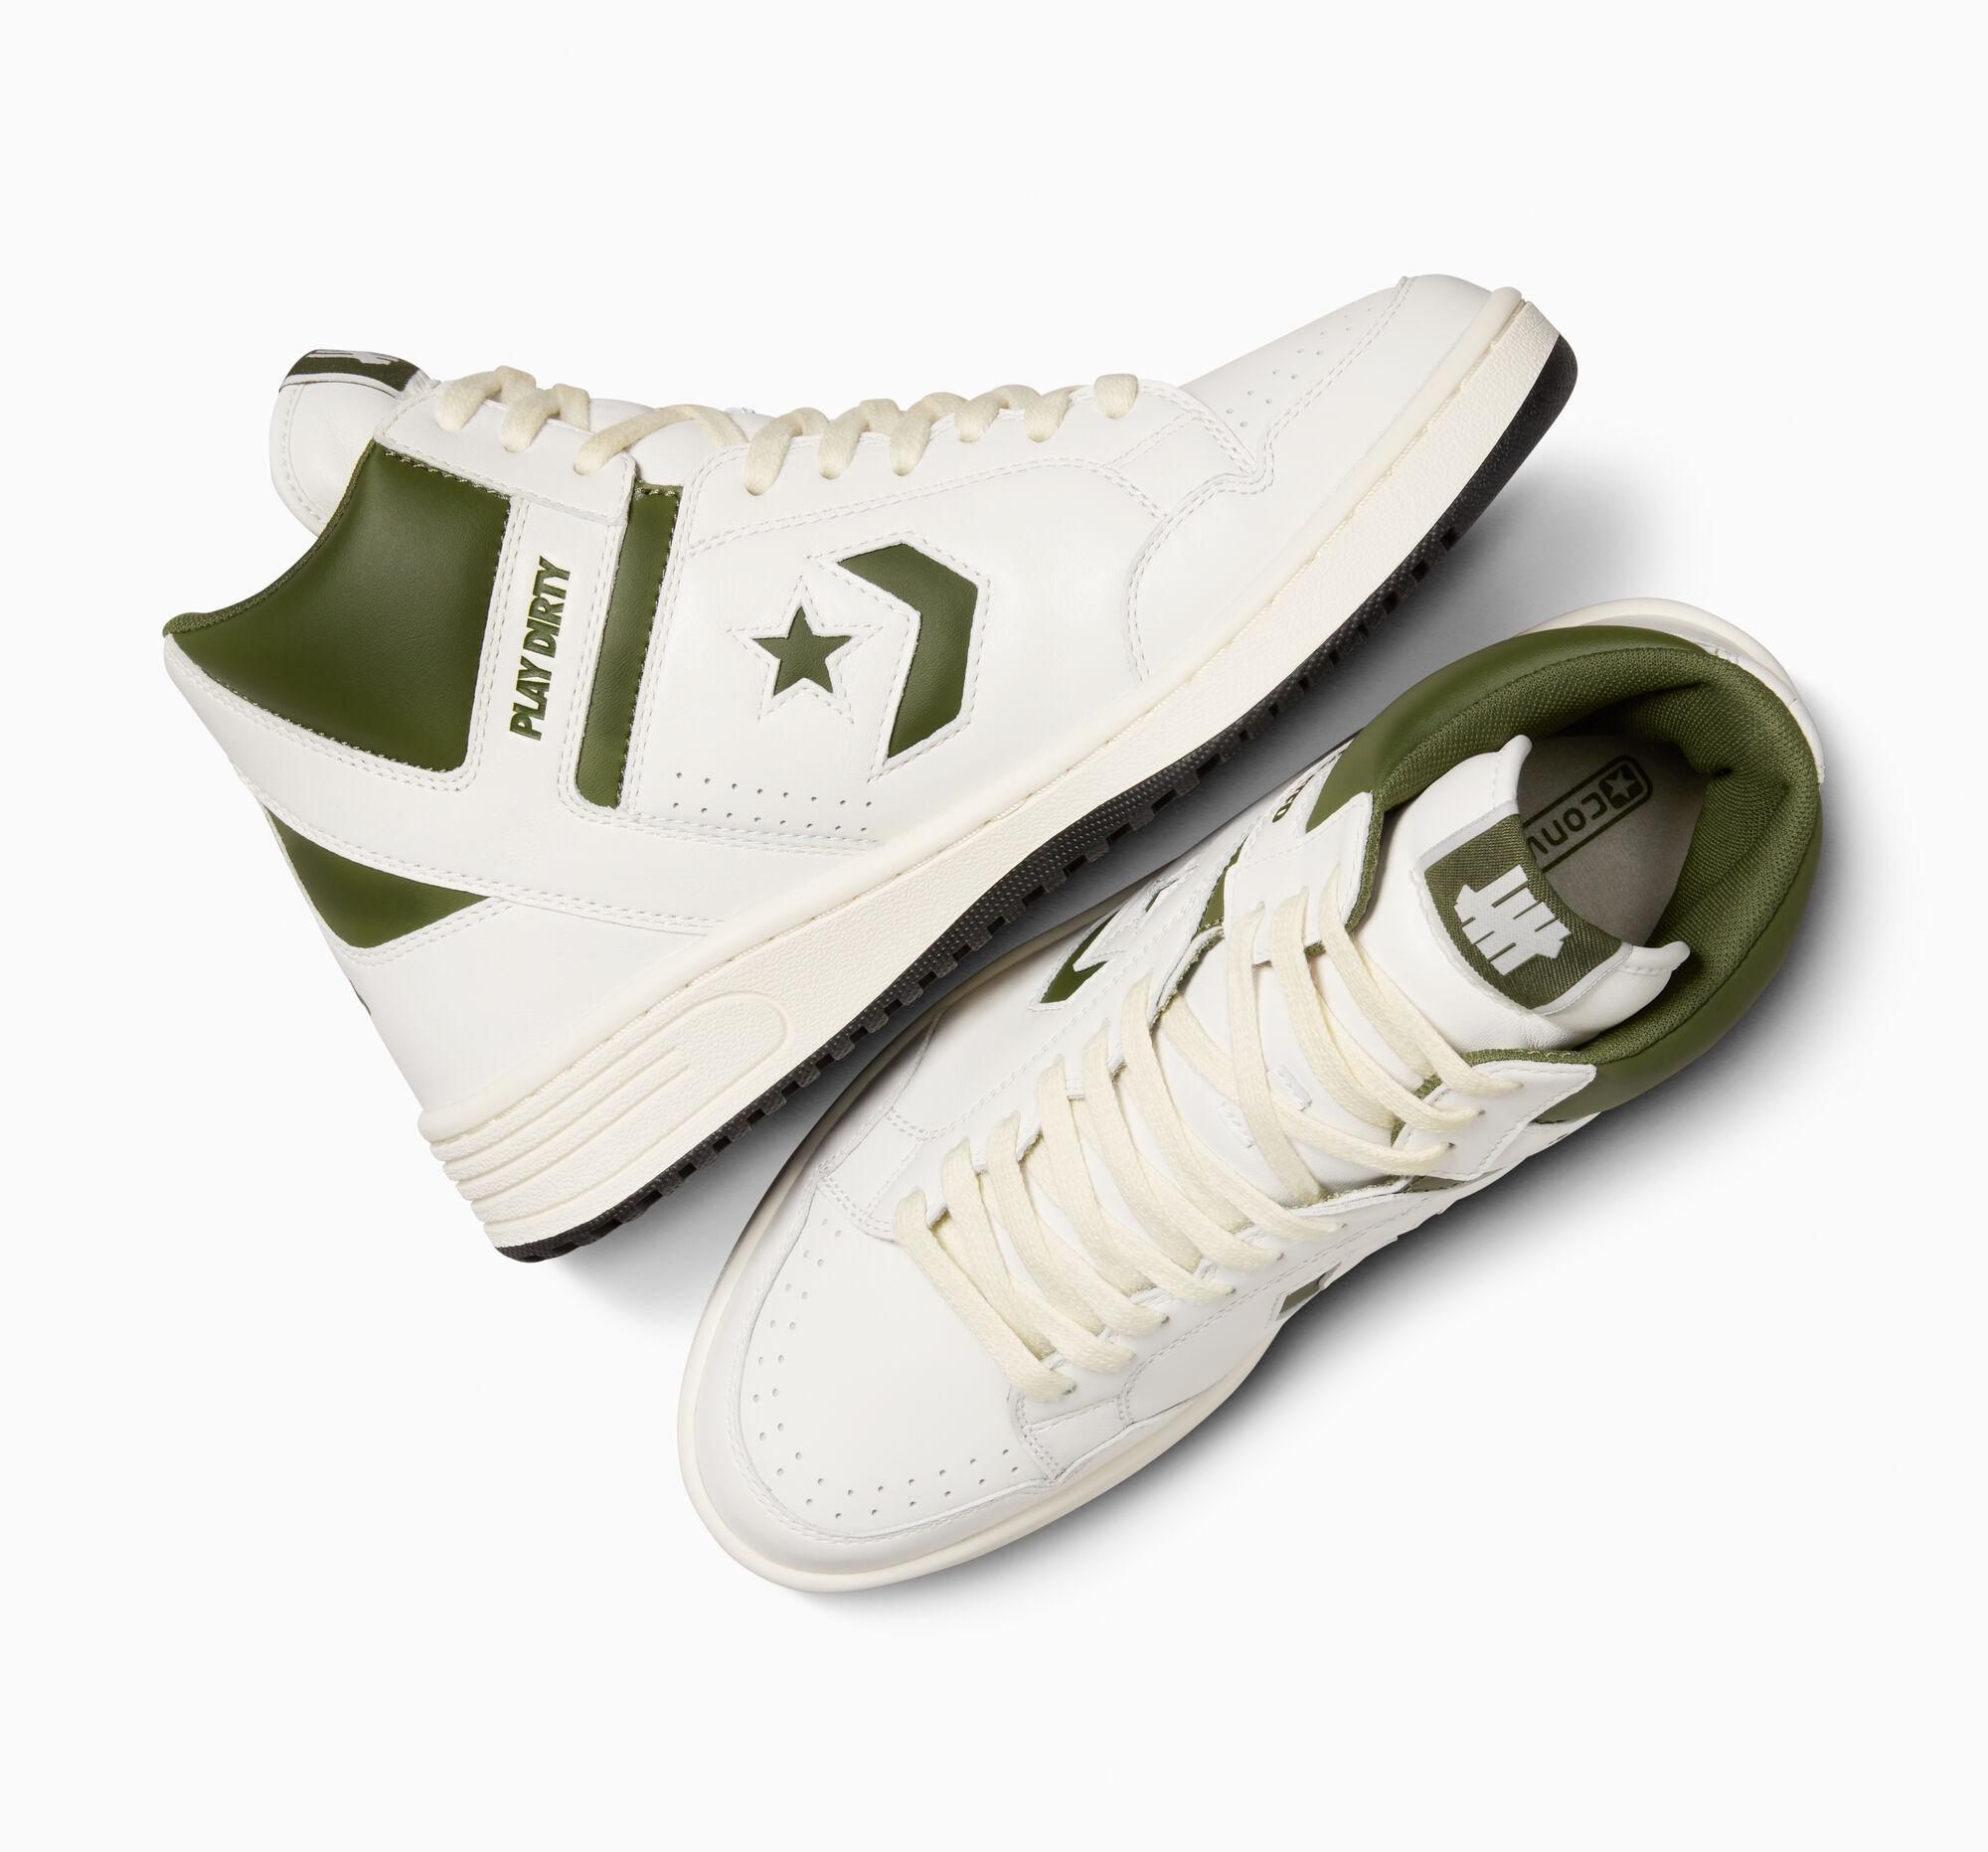 Undefeated x Converse 'Chive'